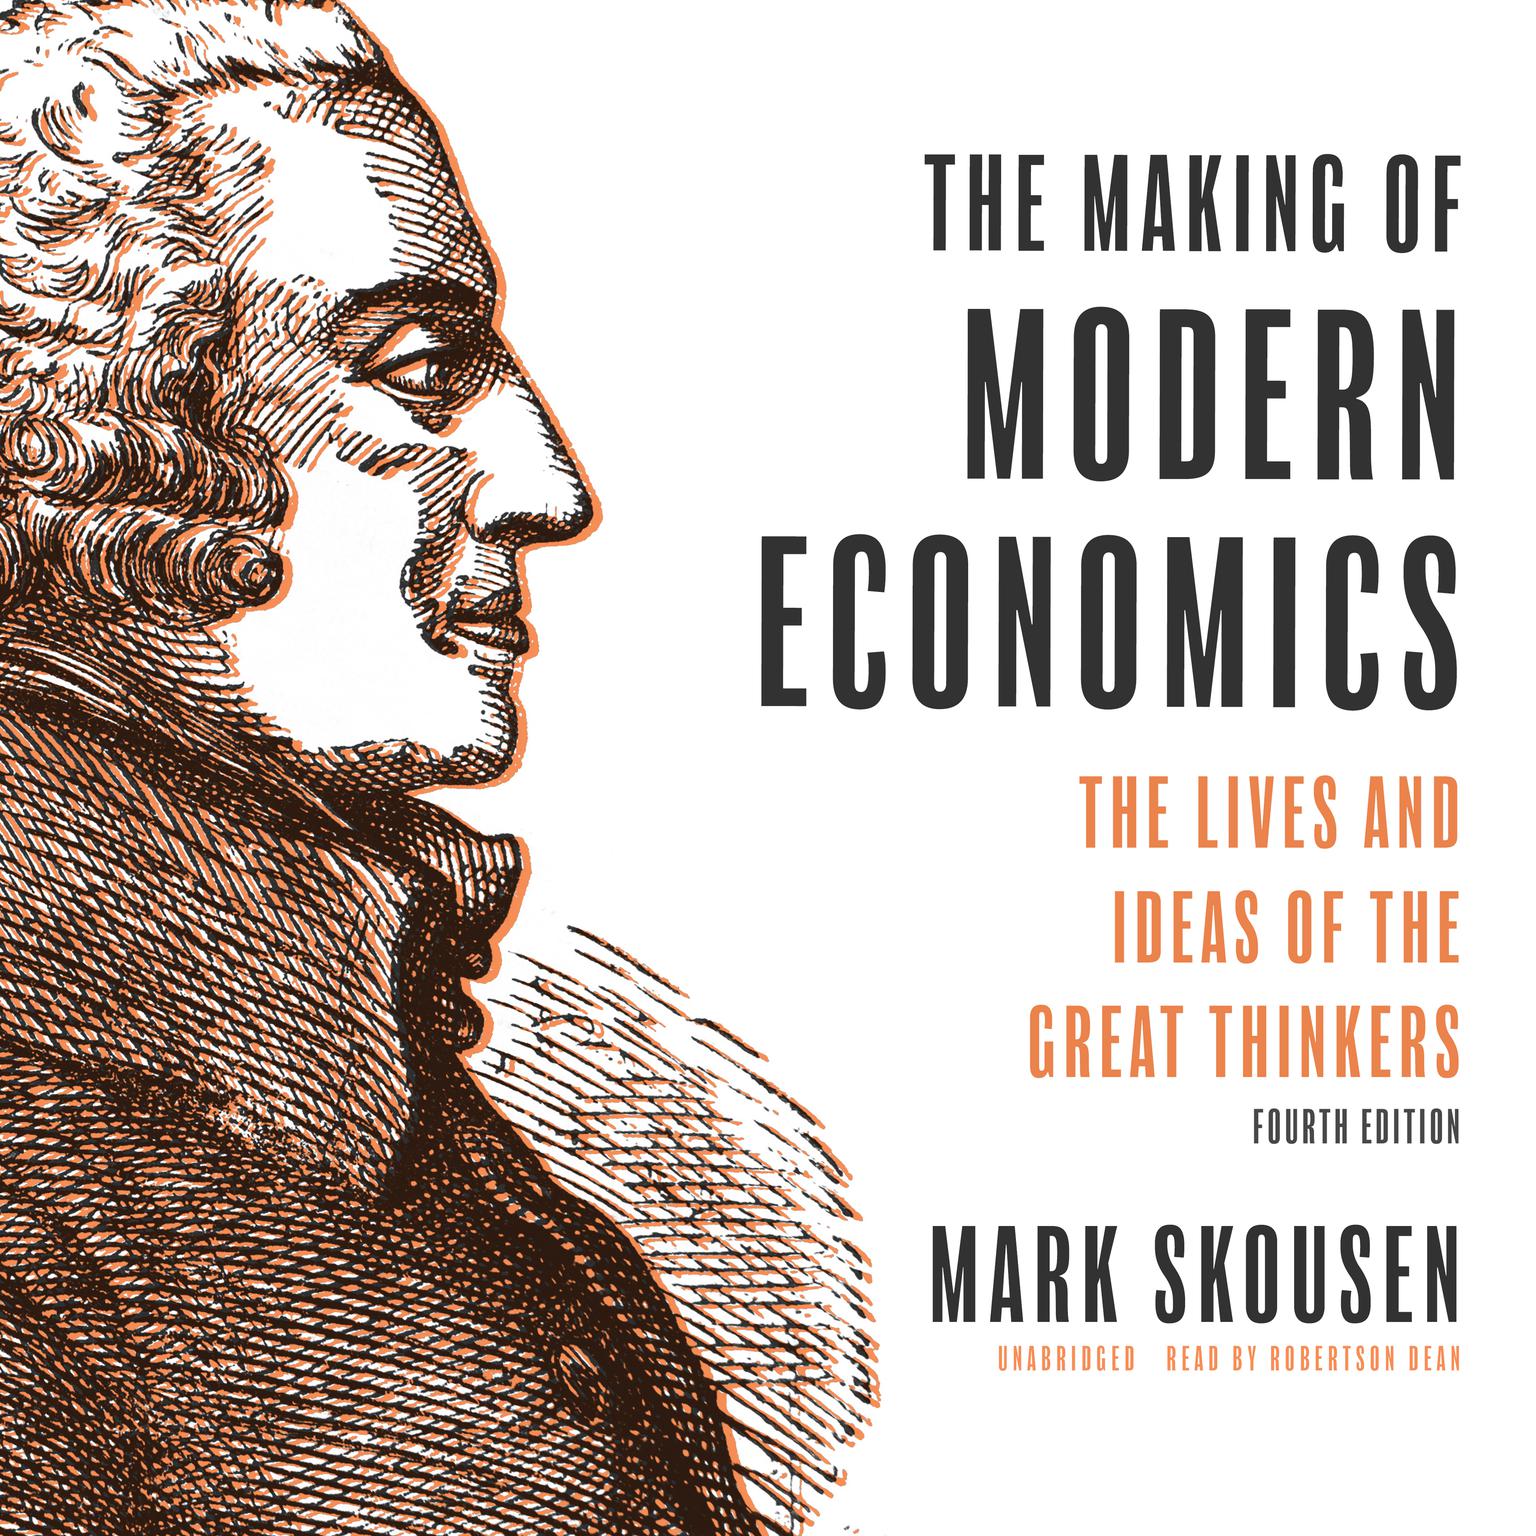 The Making of Modern Economics: The Lives and Ideas of The Great Thinkers, Fourth Edition Audiobook, by Mark Skousen